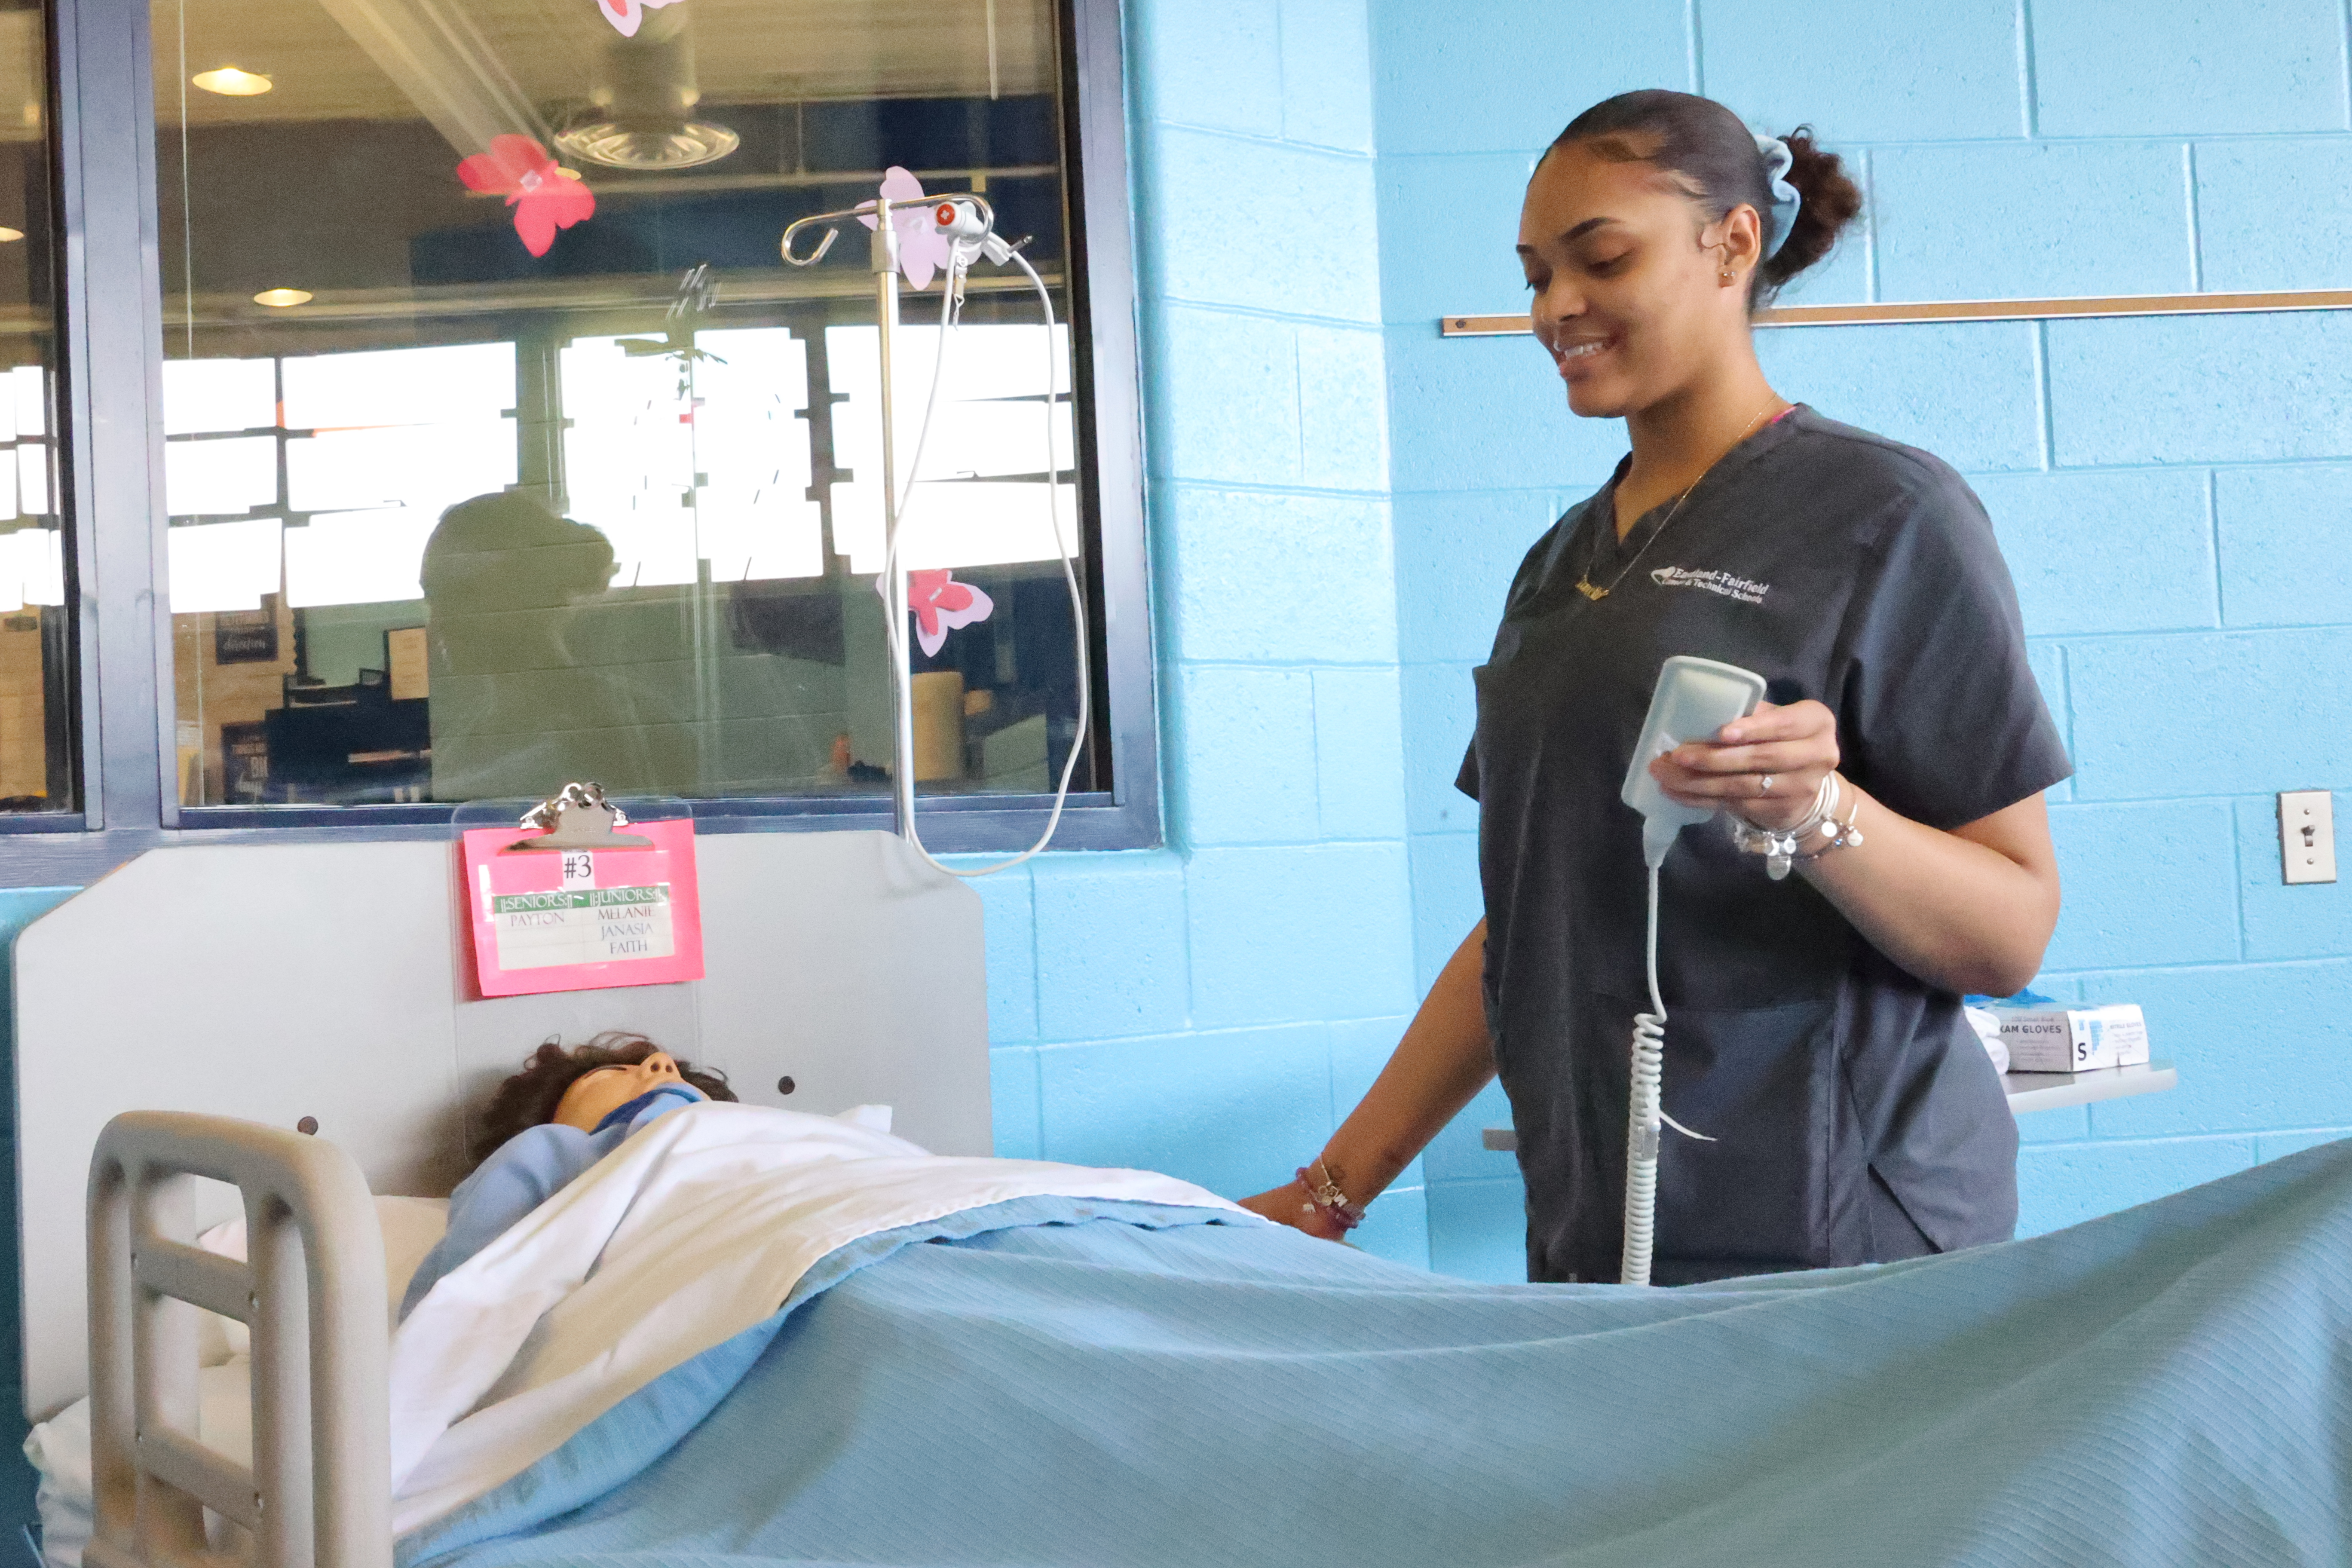 A Black, female student greets her patient while holding the bed remote control.